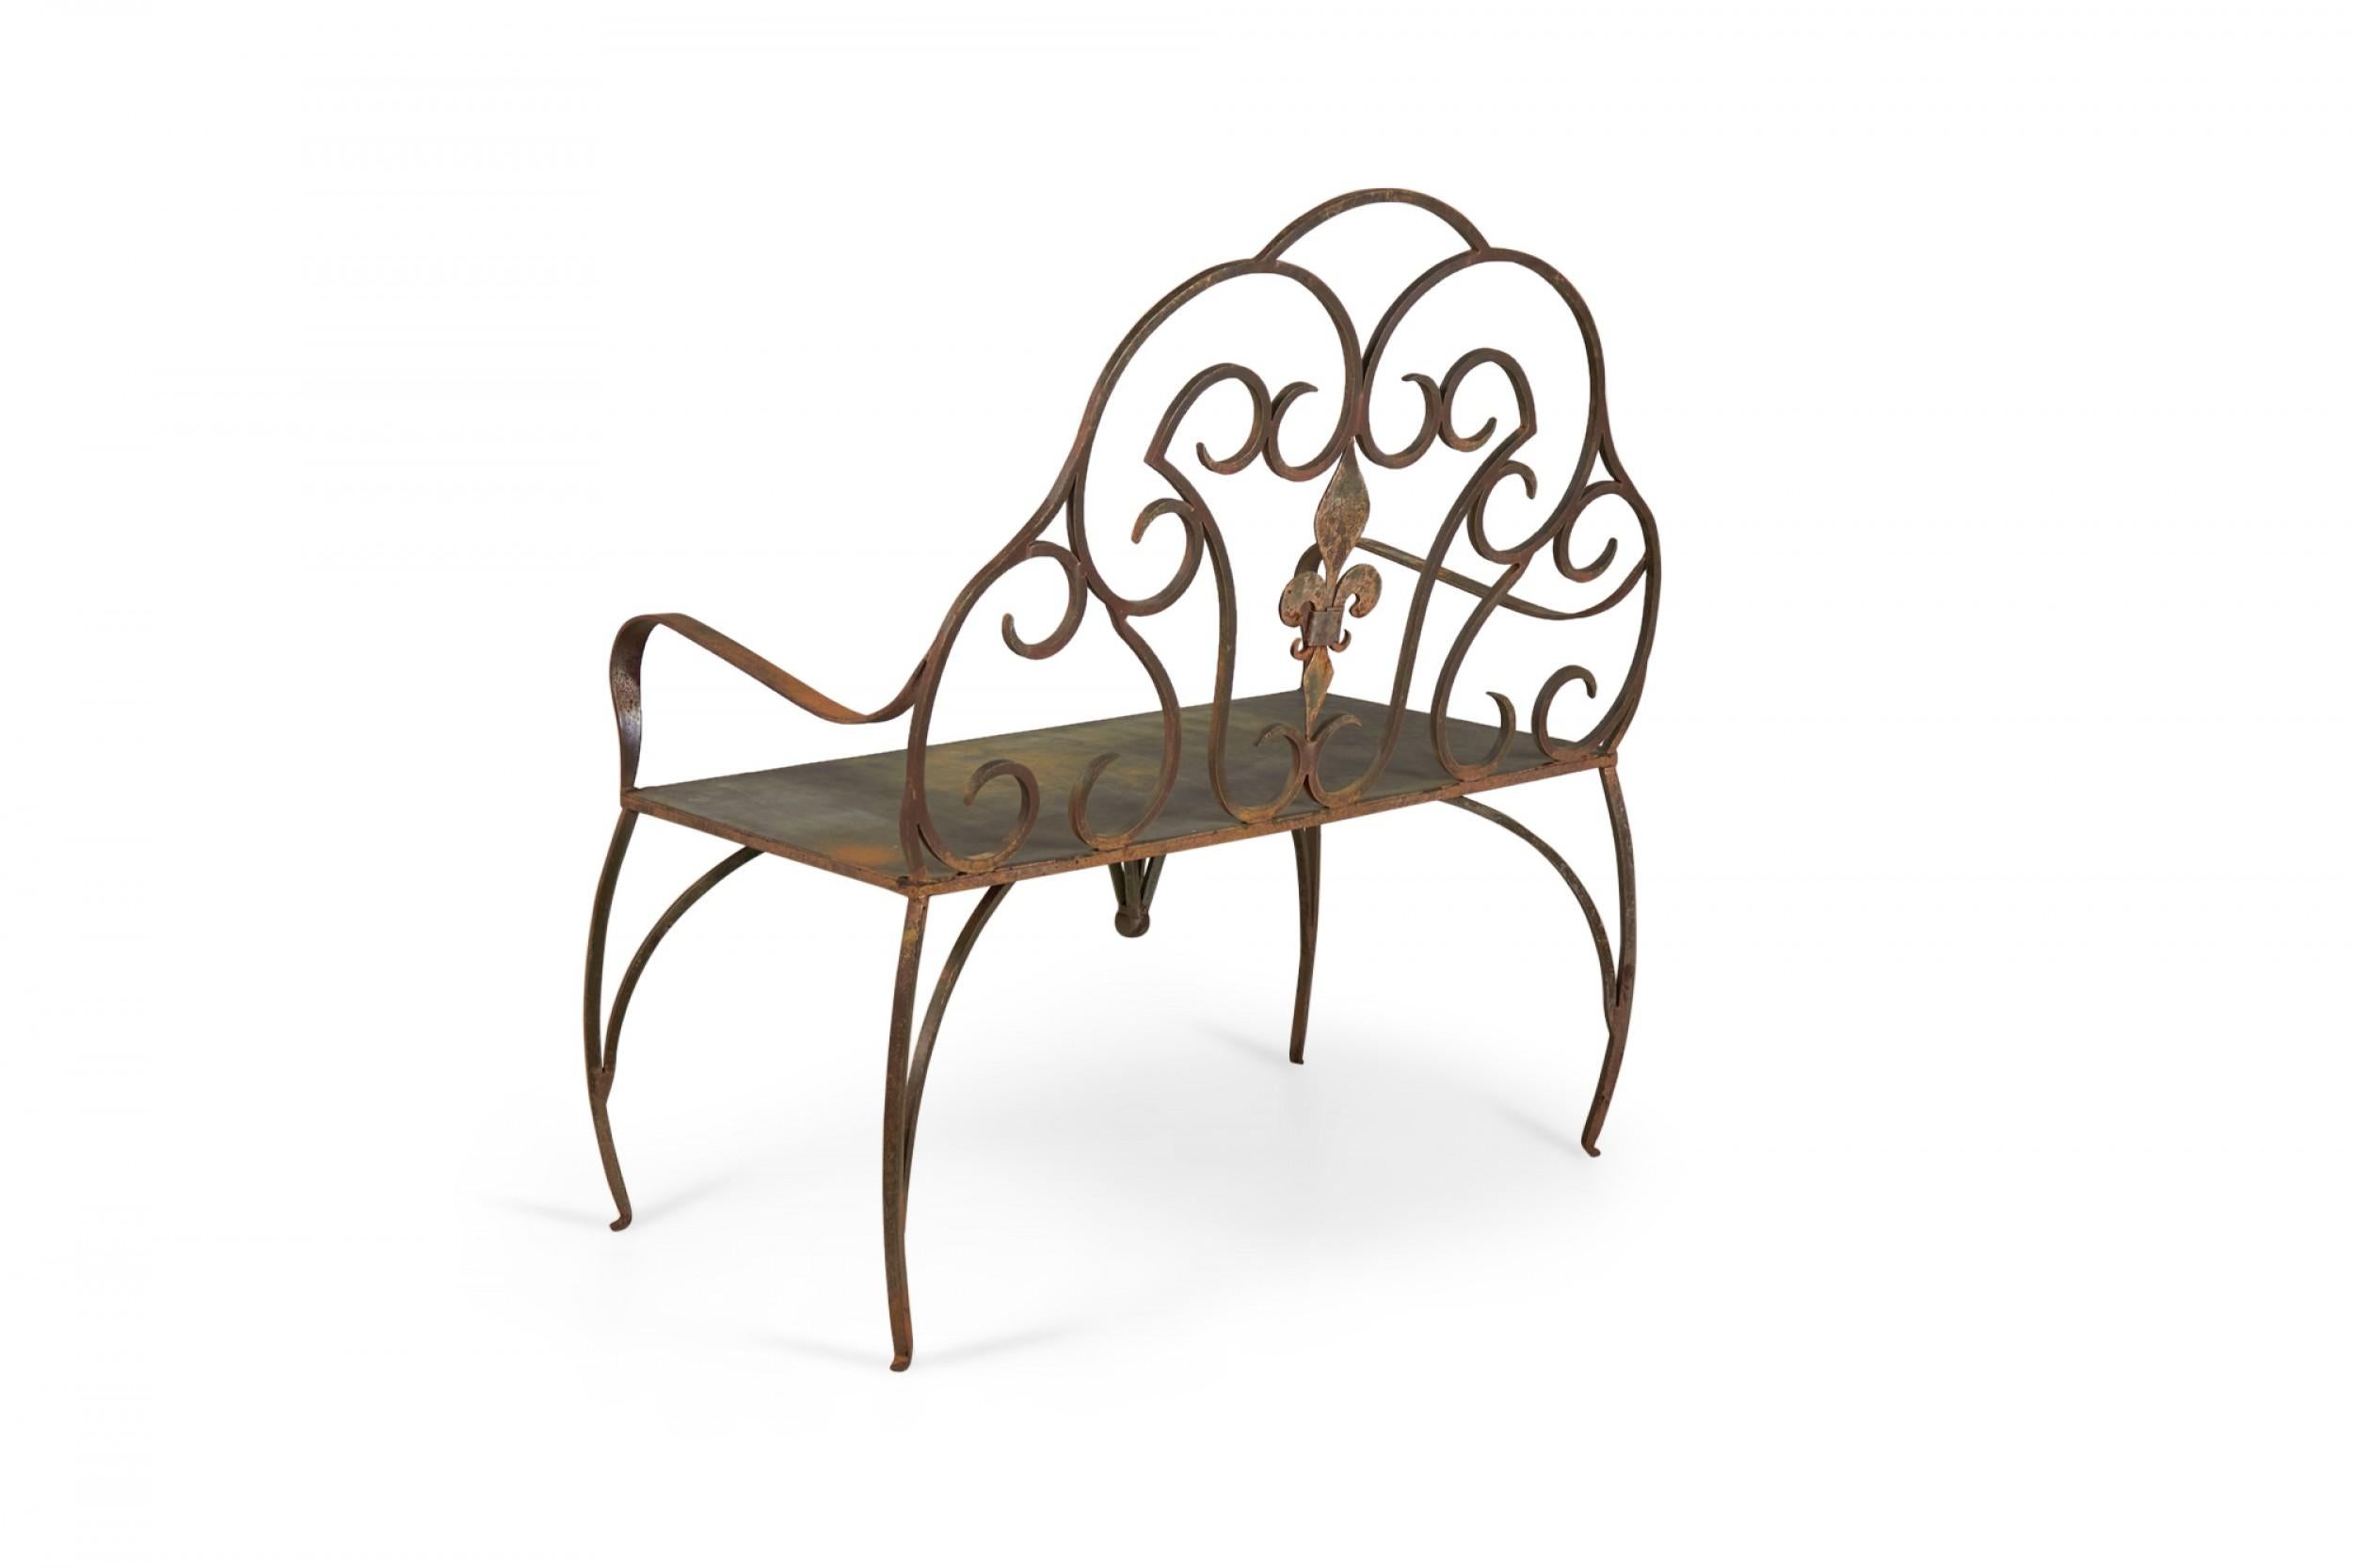 Hollywood Regency Jan Barboglio Mexican Modern Style Wrought Iron Outdoor Fleur de Lis Crest Bench For Sale